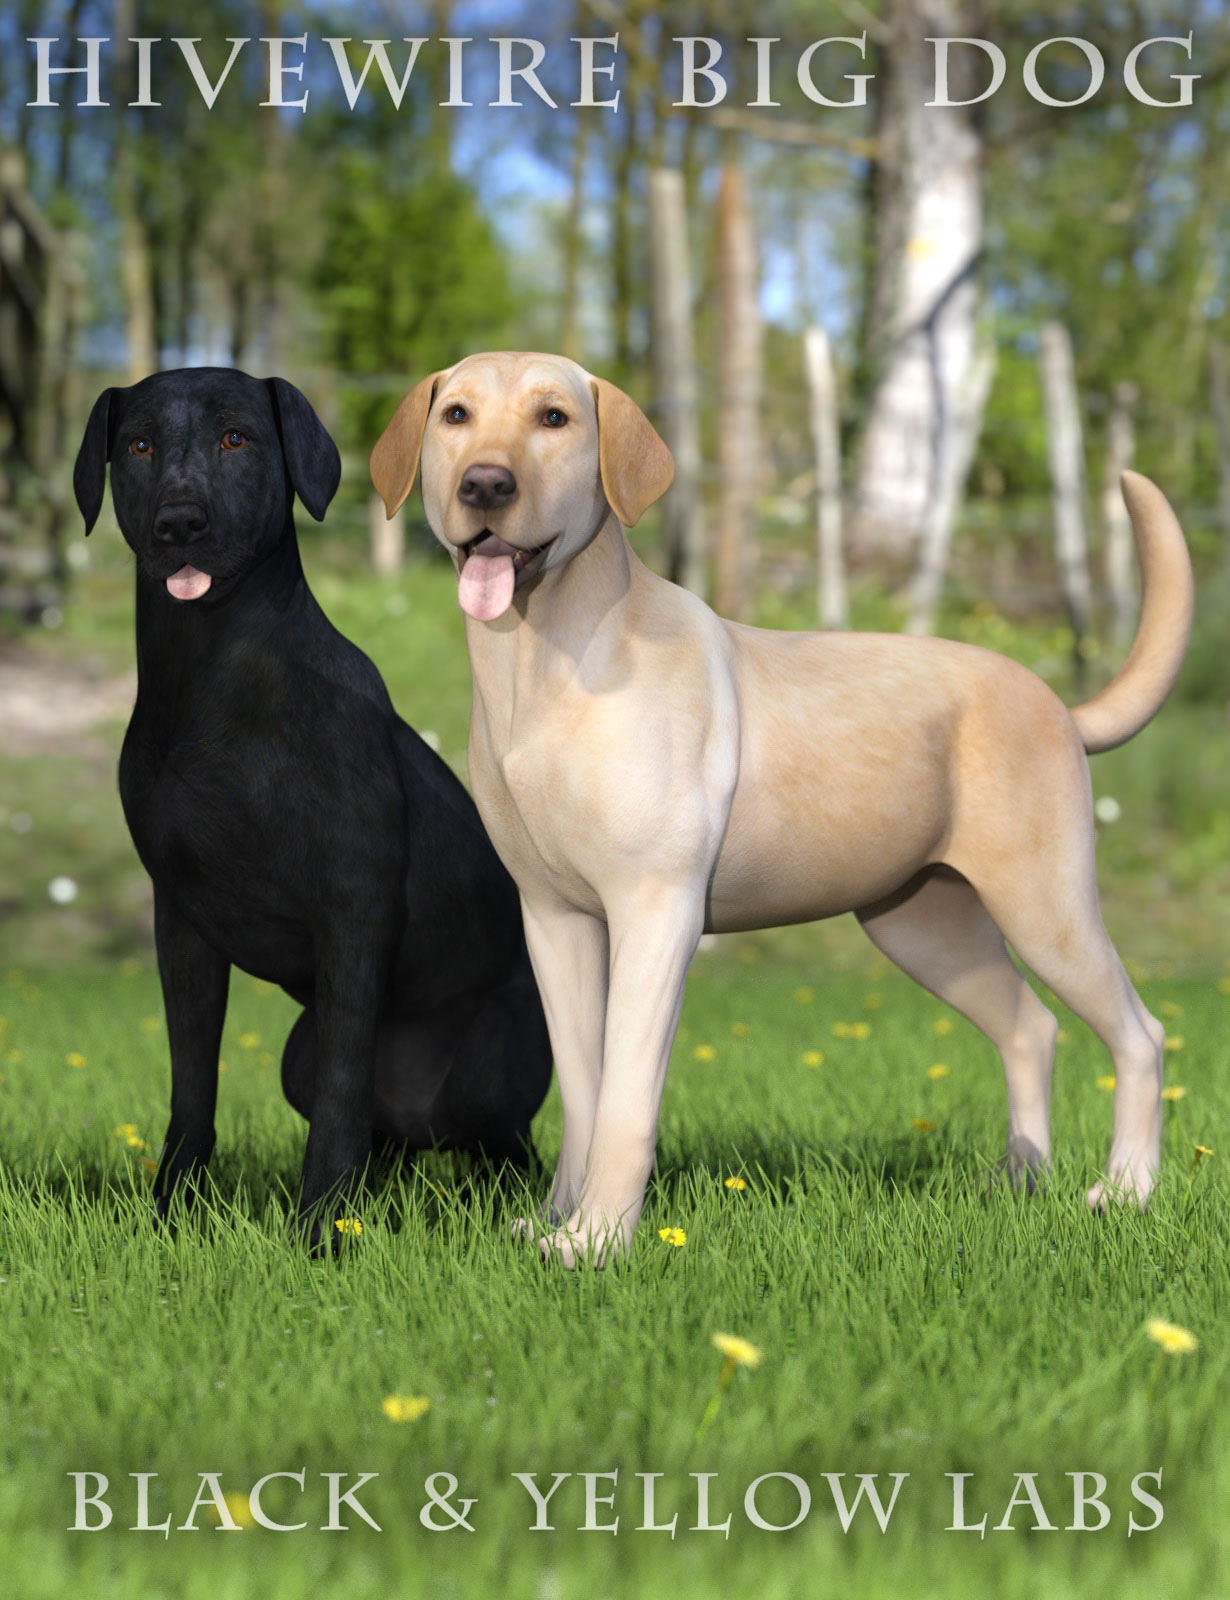 Black and Yellow Labs for the HiveWire Big Dog_DAZ3D下载站